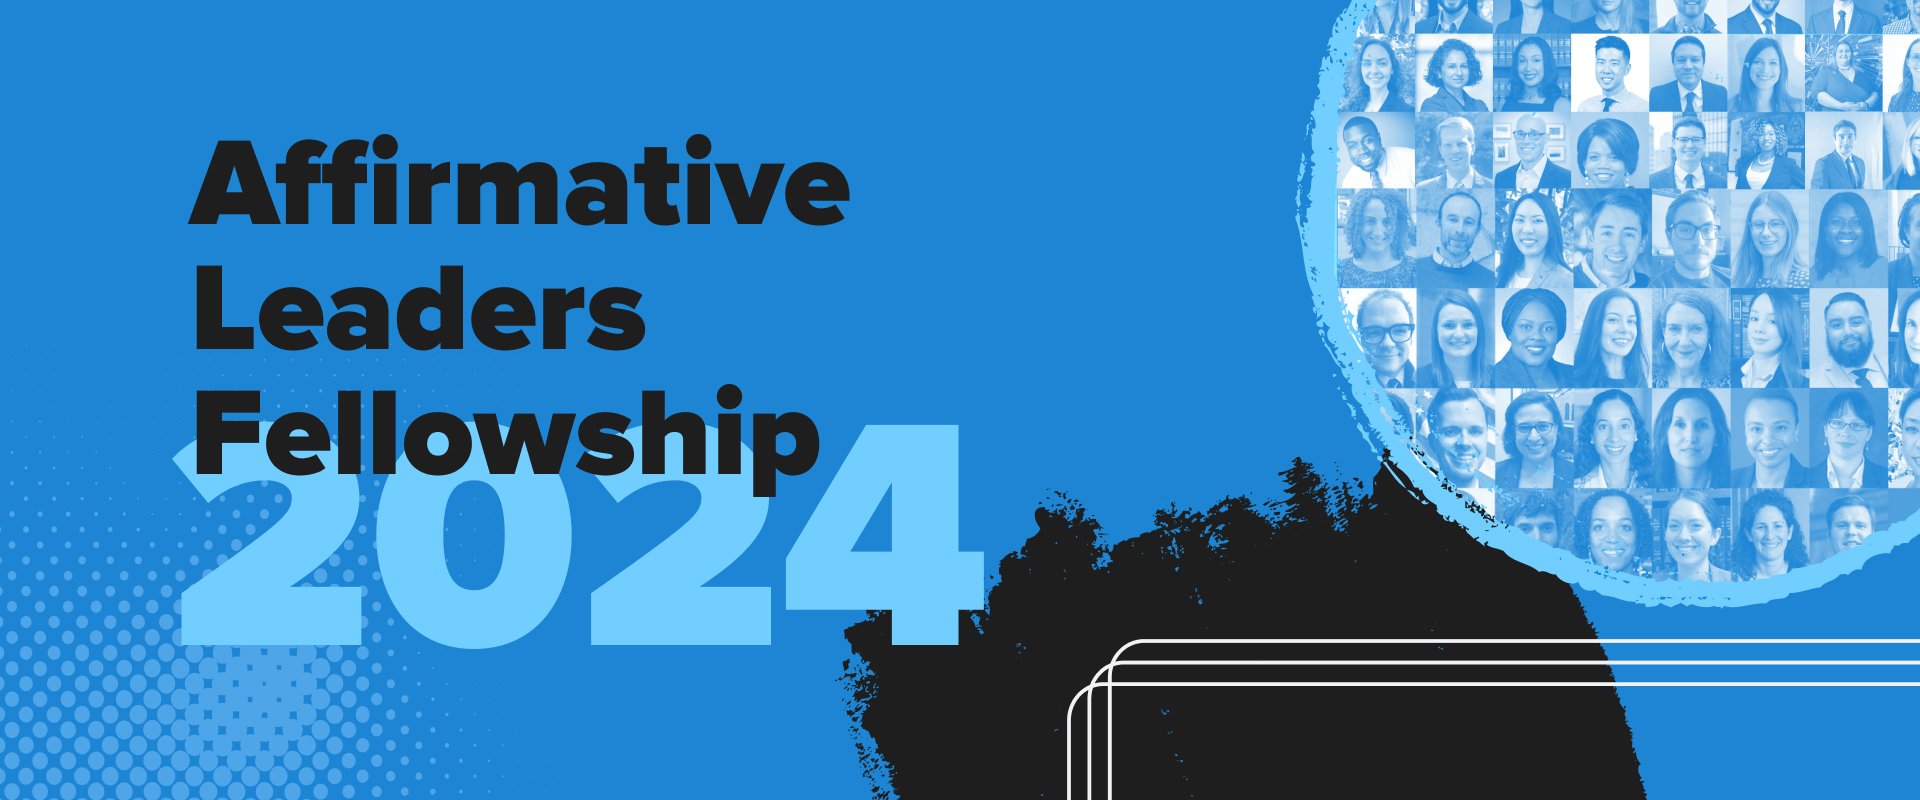   JOIN US! Apply for PRP's Affirmative Leaders Fellowship    Apply Now  